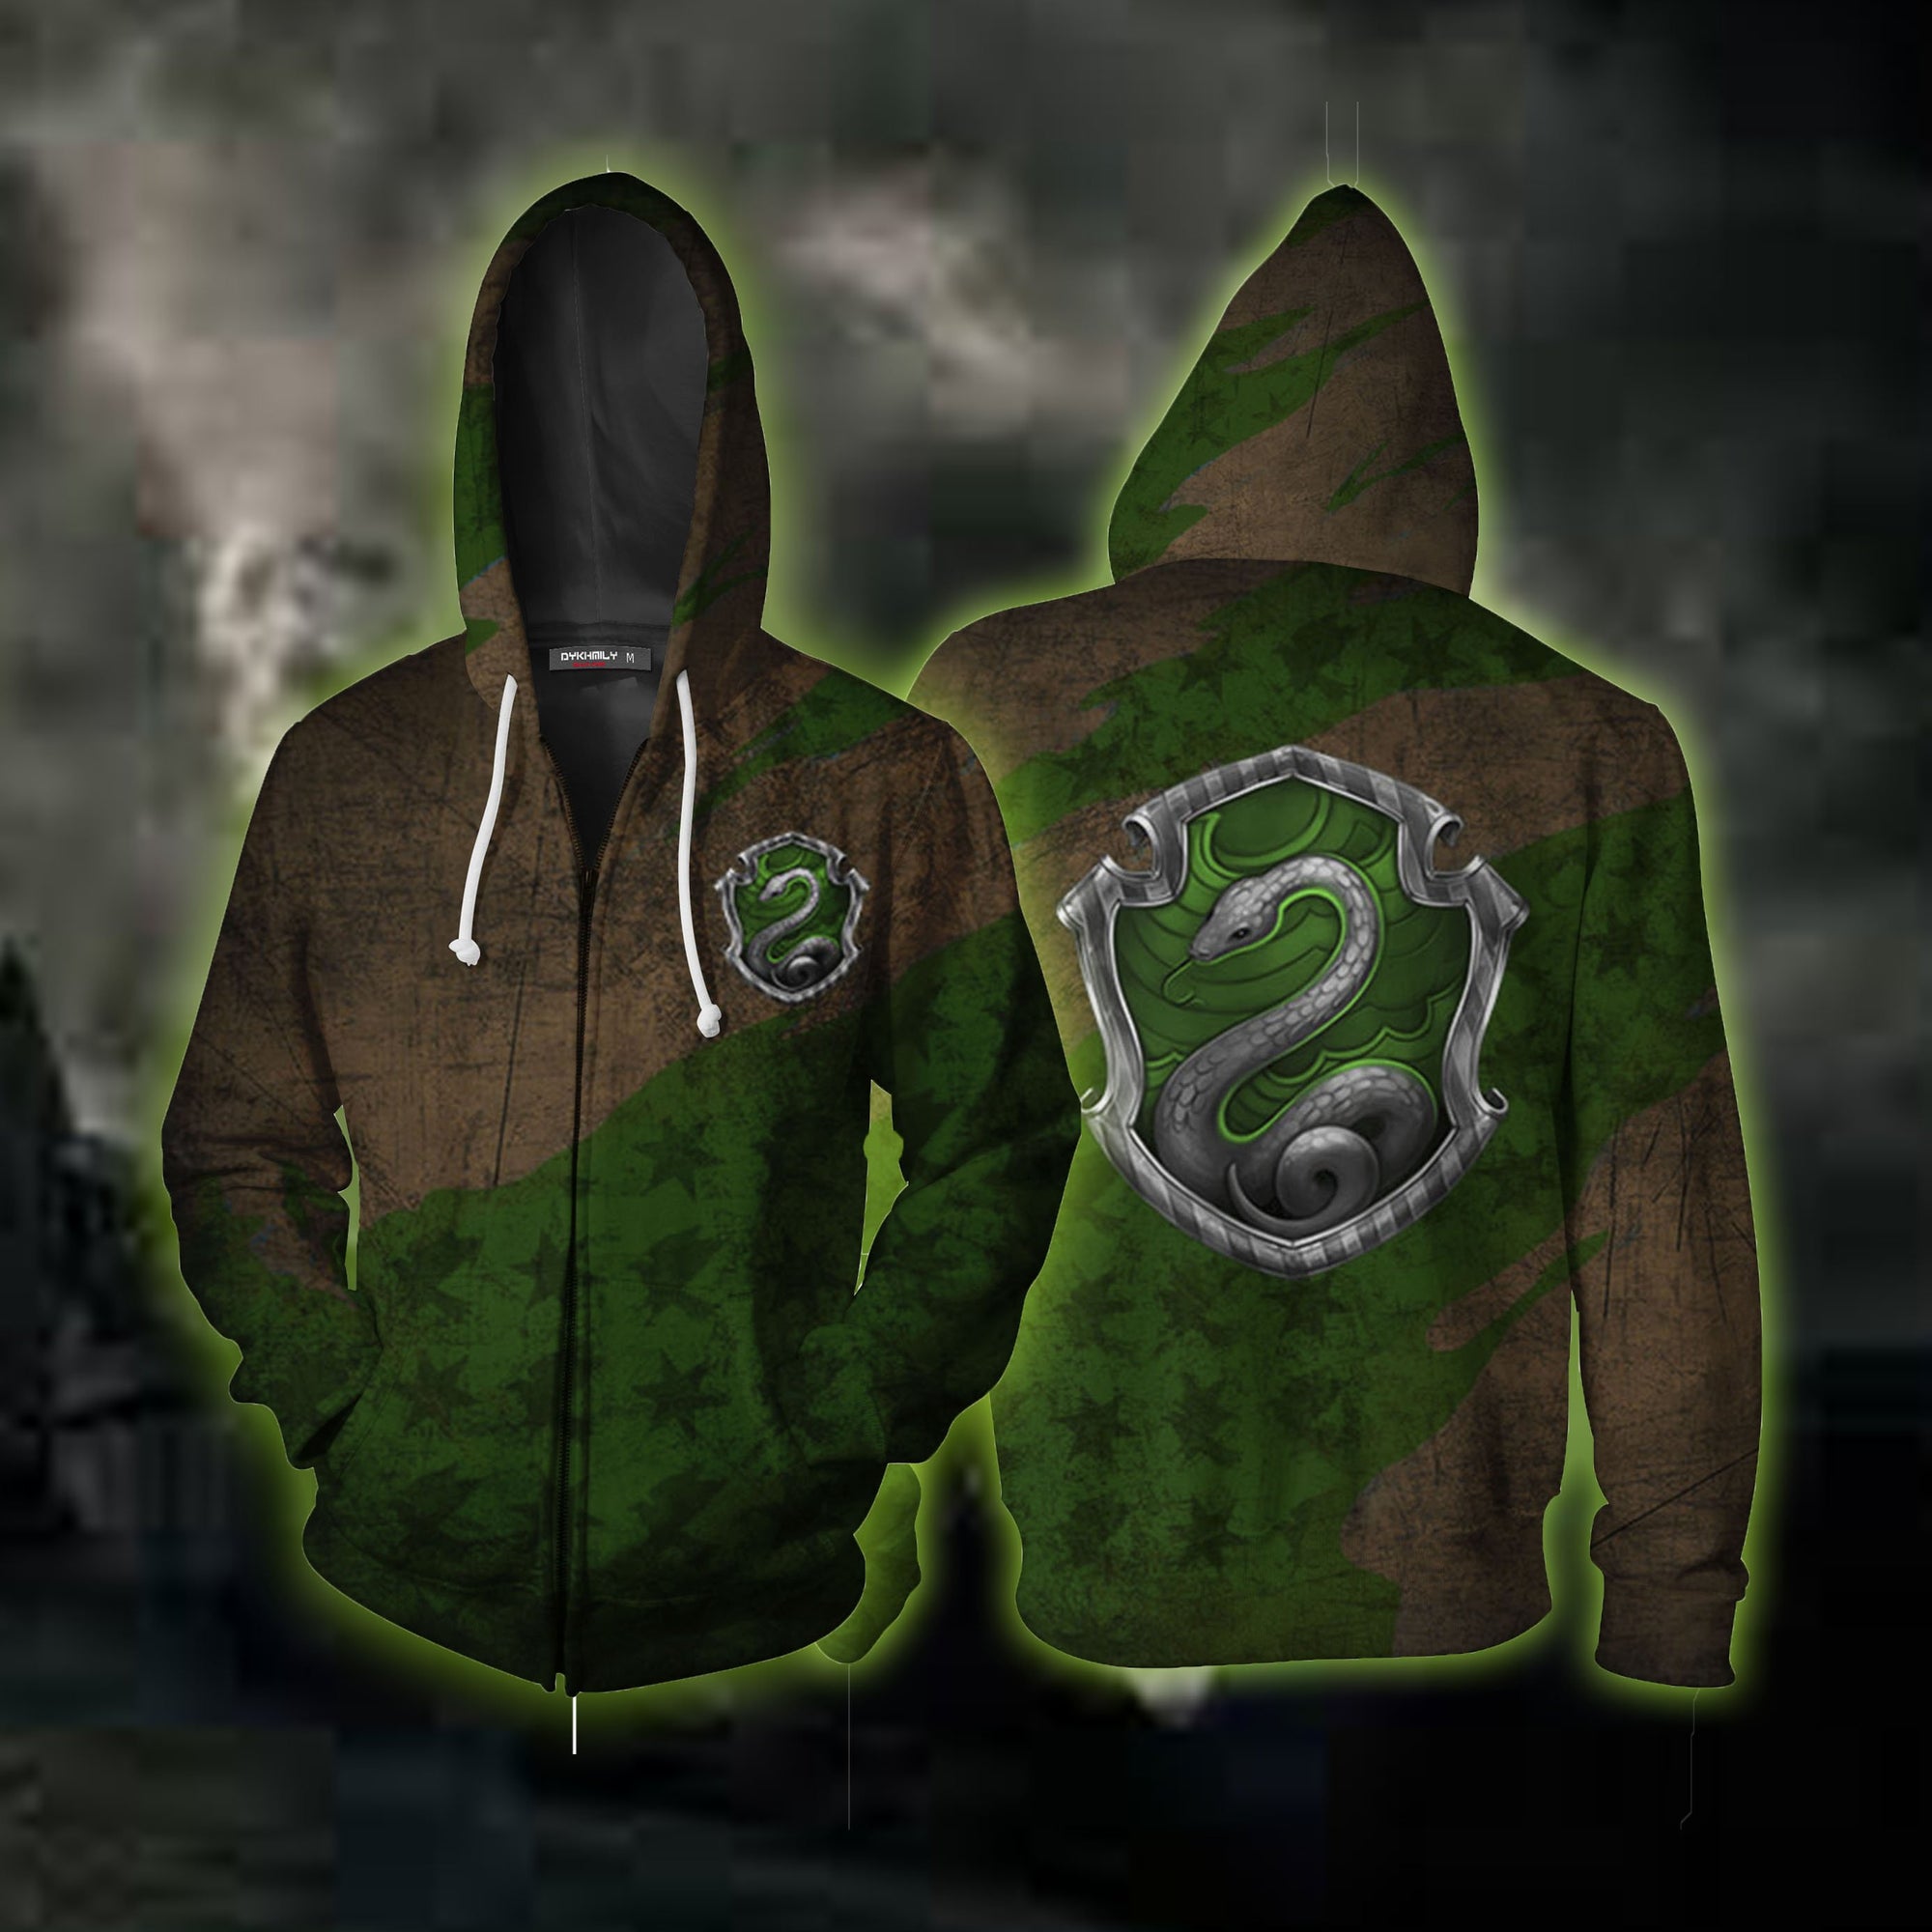 Harry Potter Slytherin House Zip Up Hoodie